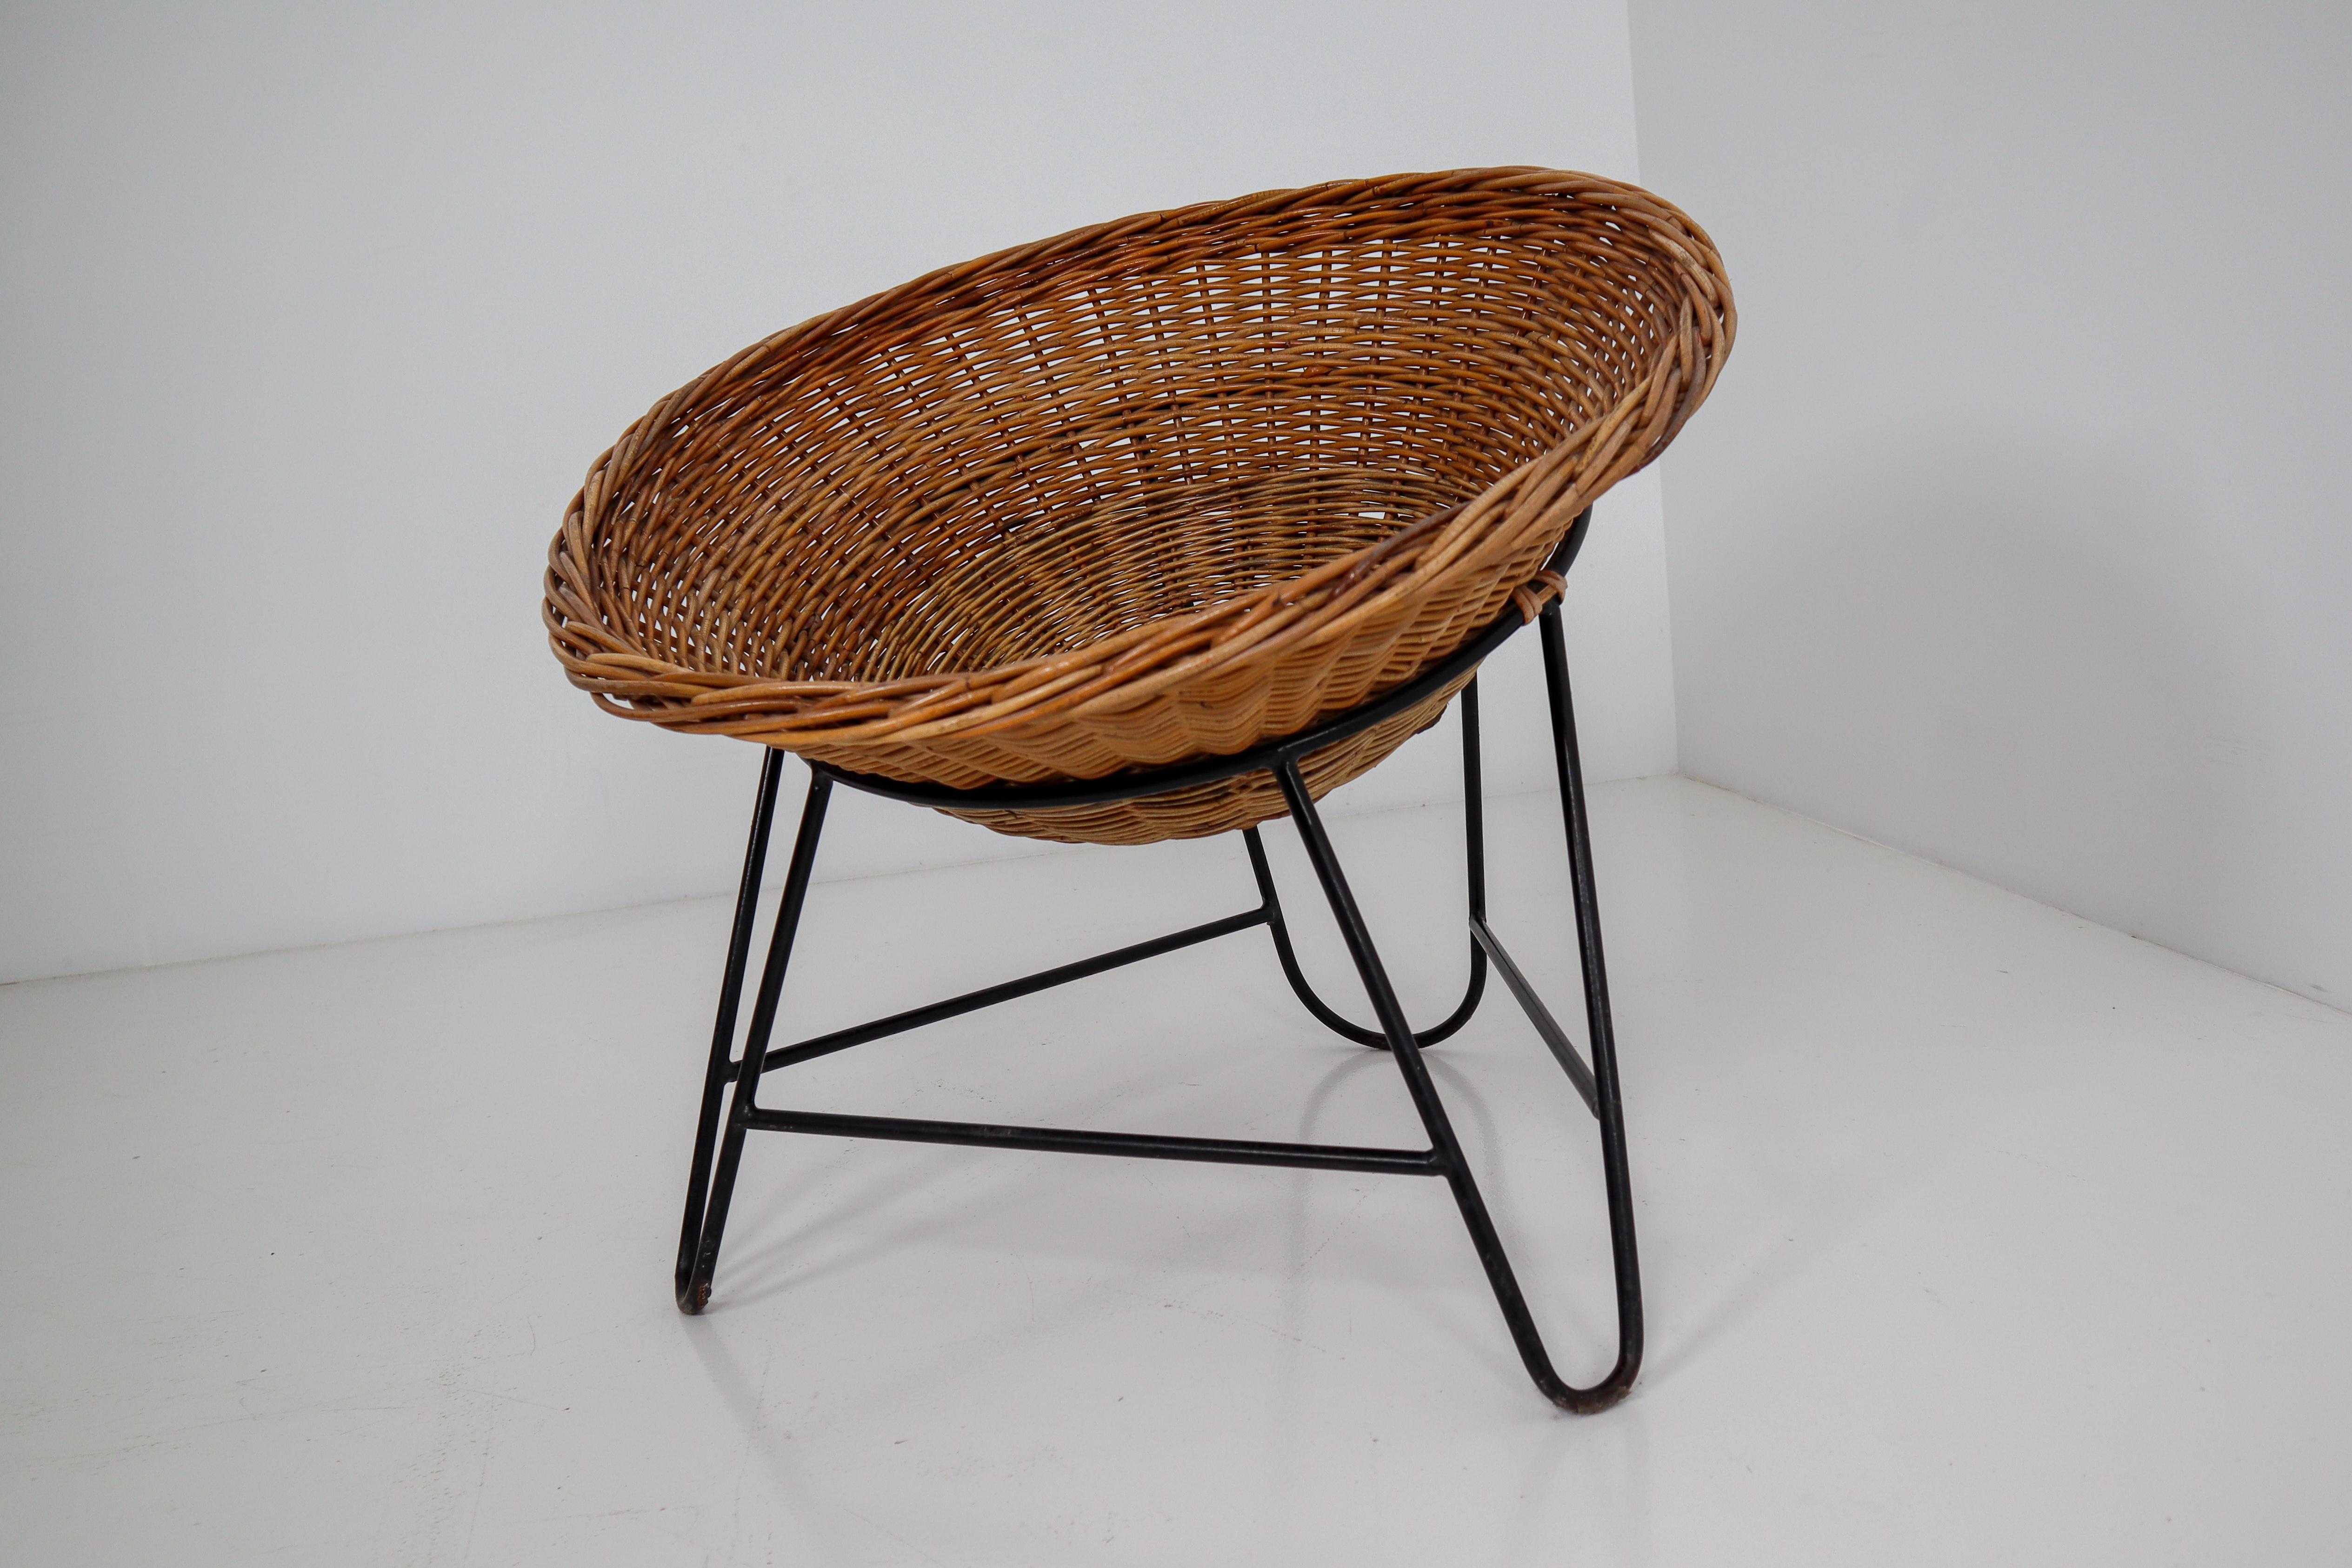 Large set wicker midcentury easy chairs designed and produced in Europe during the 1960s. The chairs are made from handwoven wicker for the seat that is formed into a basket. The frame is made of black lacquered steel. They are comfortable to sit in